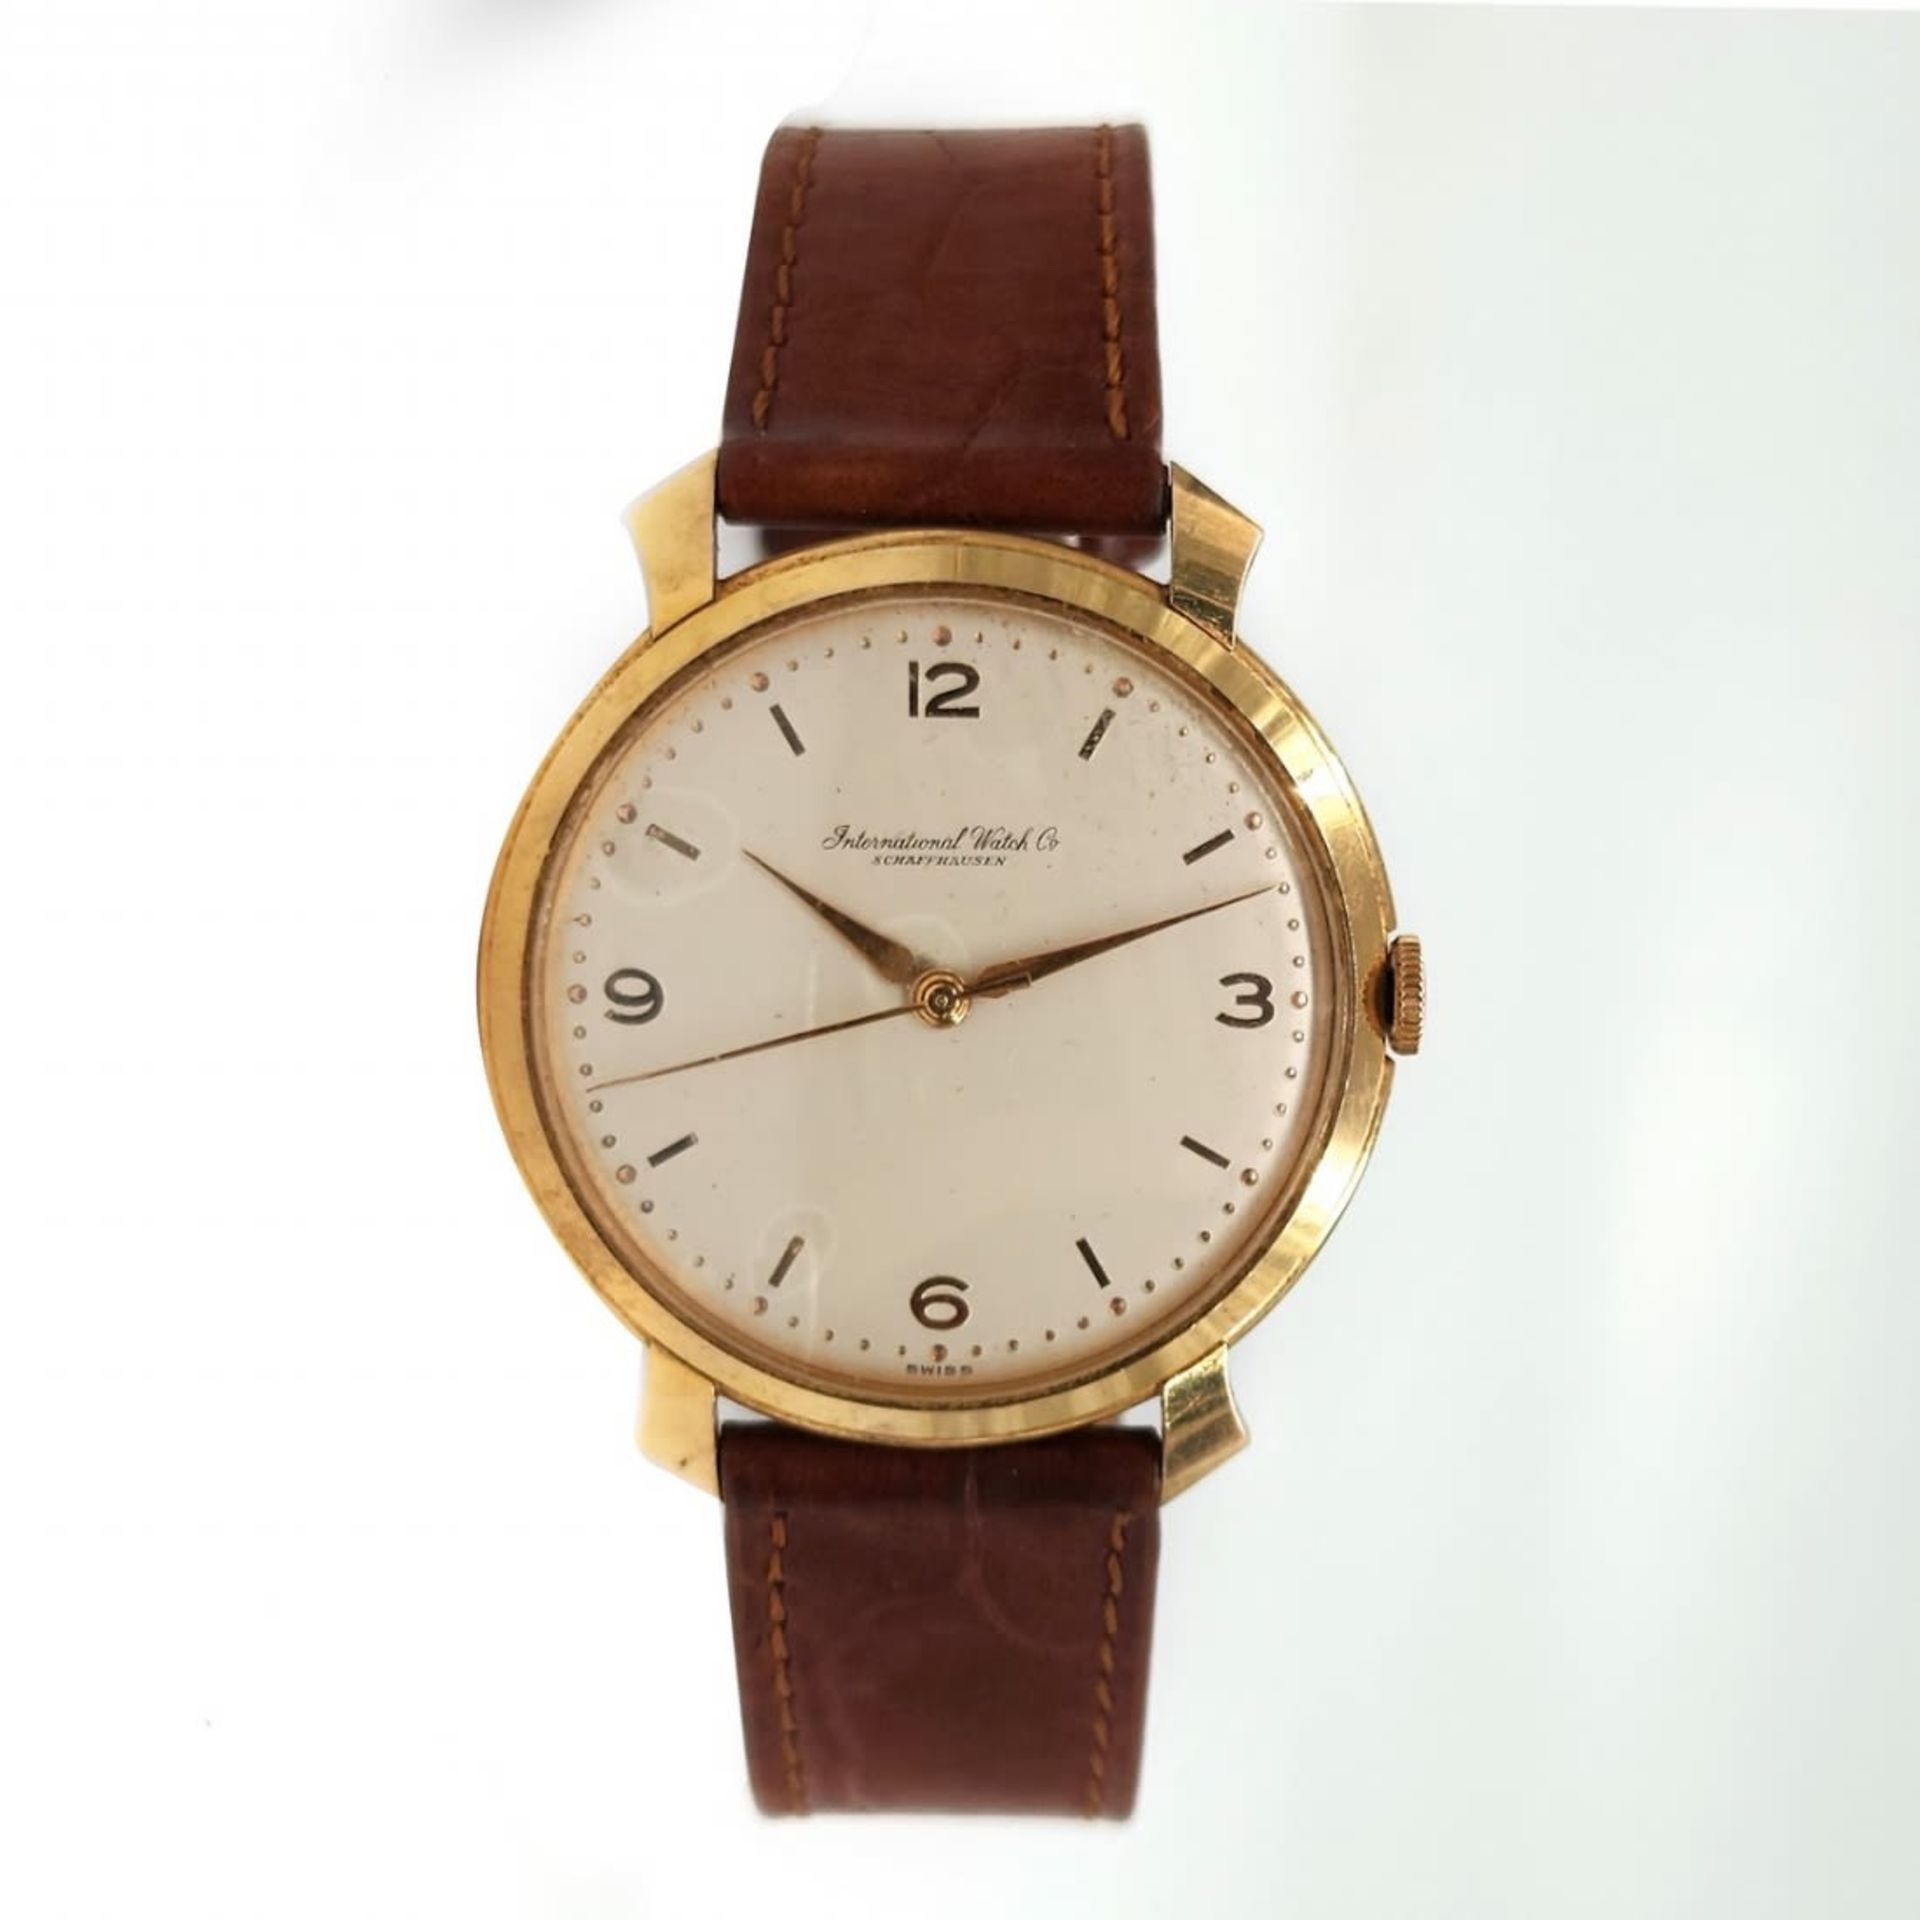 Wristwatch for men made by: 'Schaffhausen', 14k yellow gold, brown leather strap, working